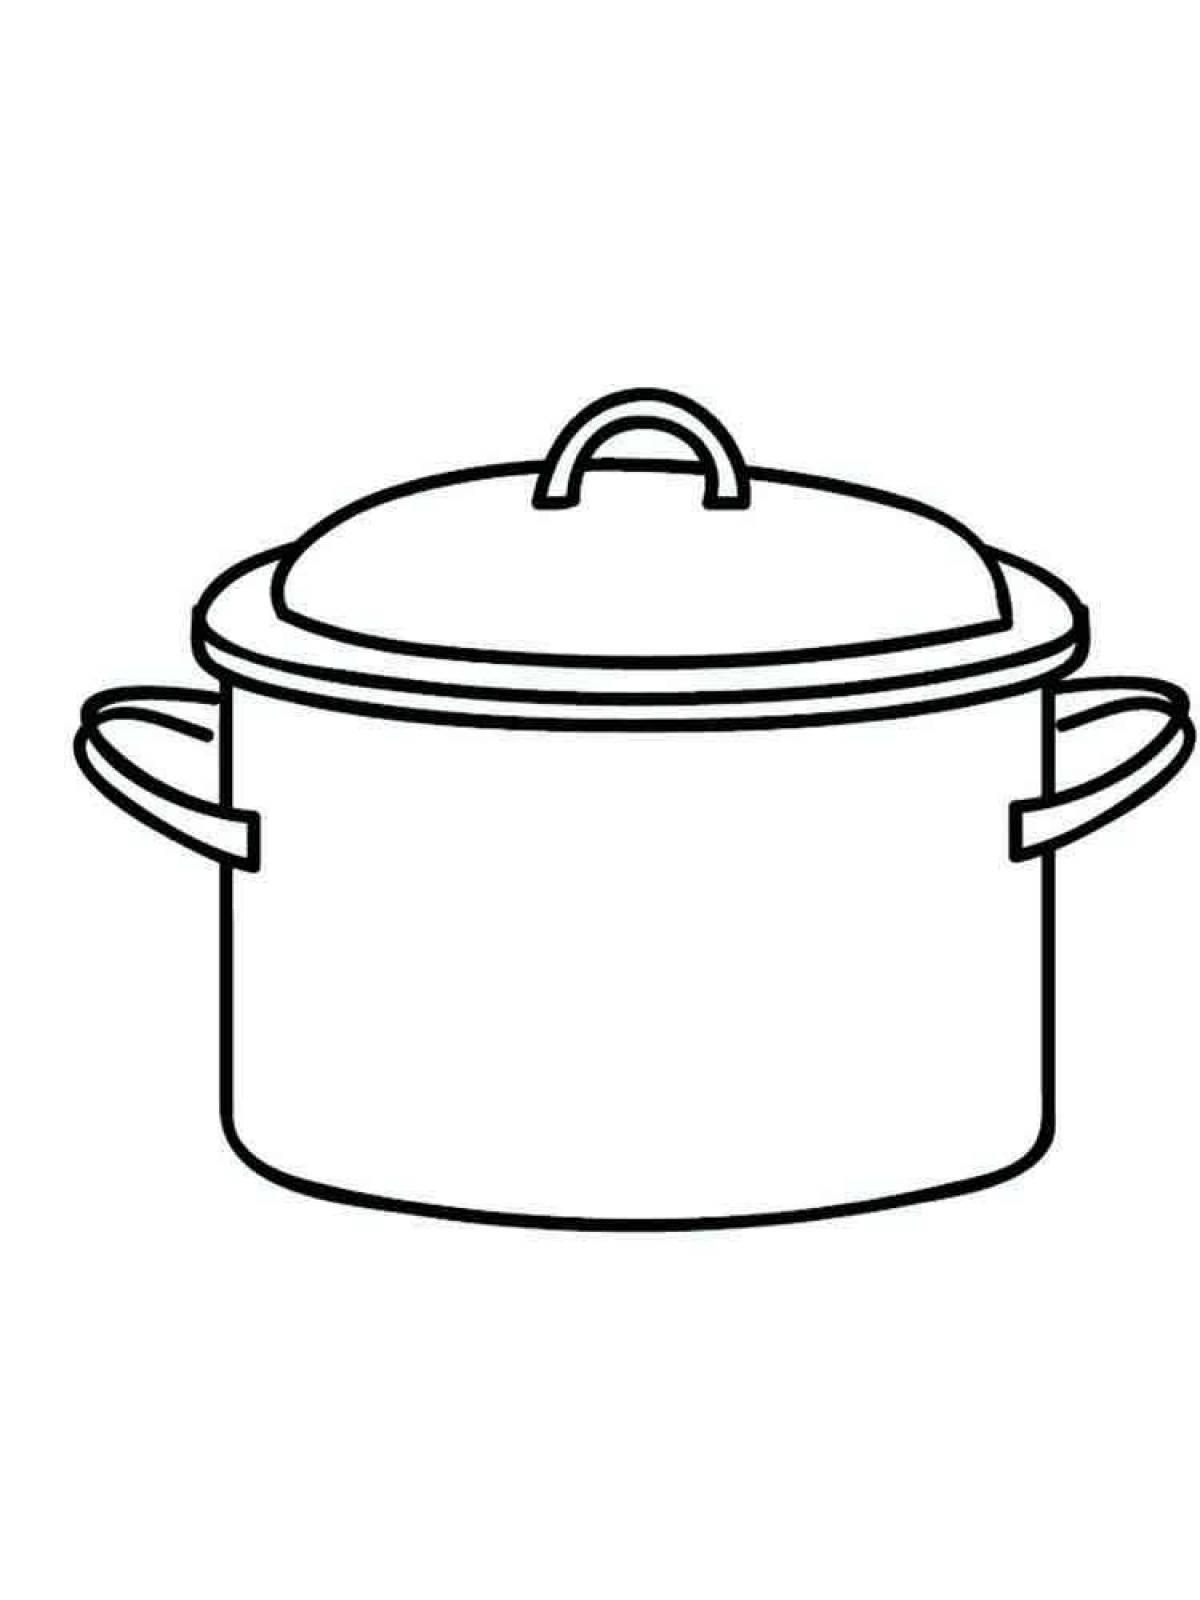 Cute pan coloring page for kids